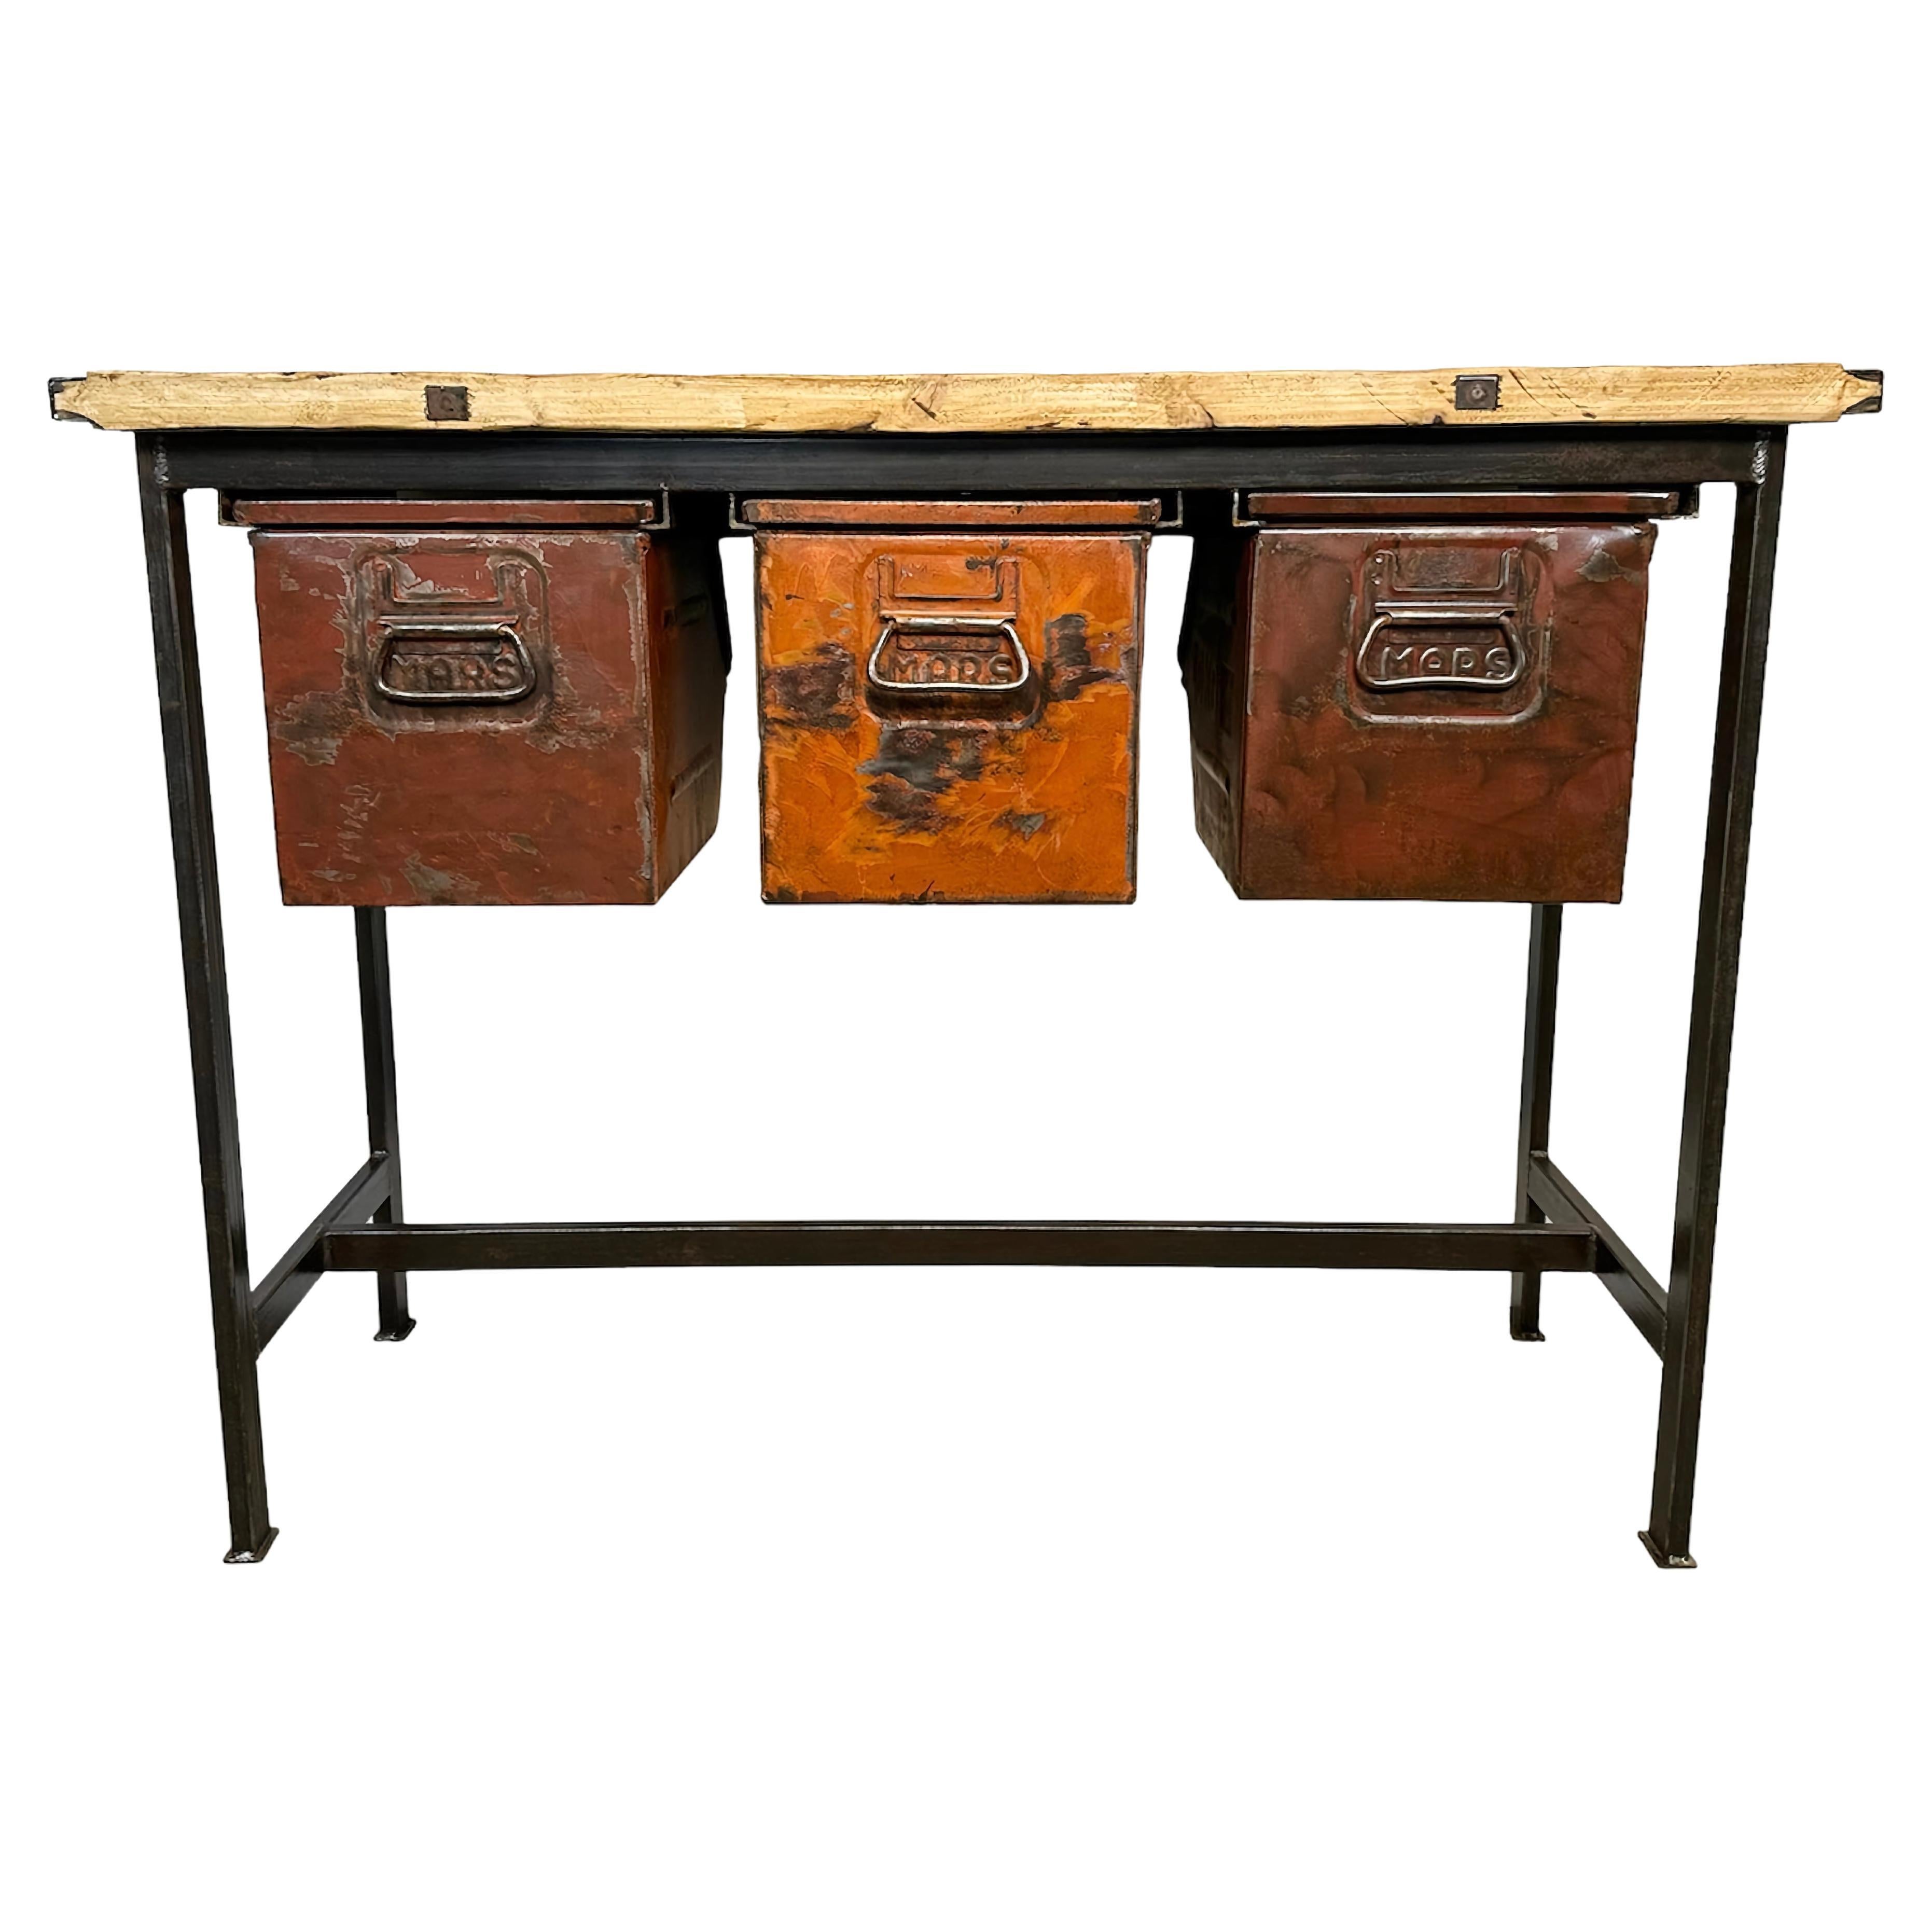 Industrial Worktable with Three Iron Drawers, 1960s